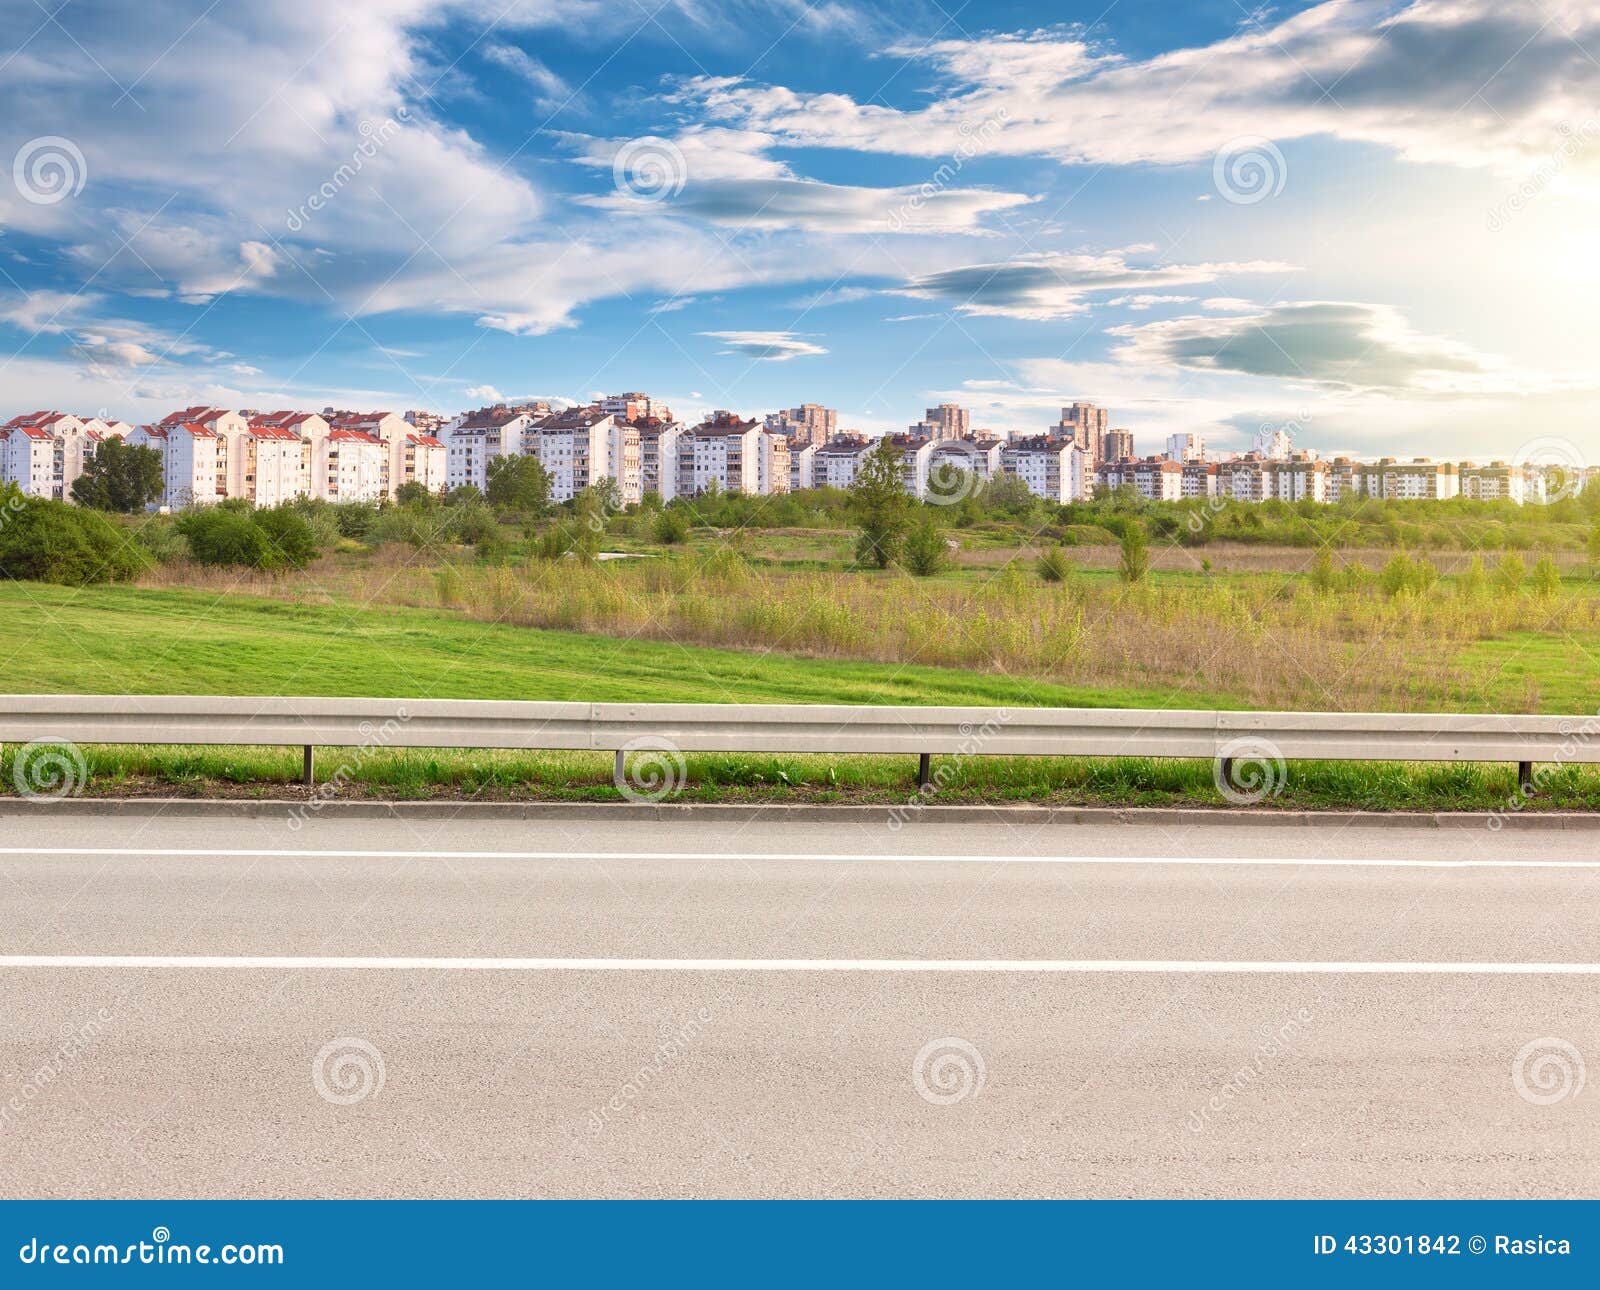 Side View of Road and Cityscape in Background Stock Photo - Image of roof,  city: 43301842